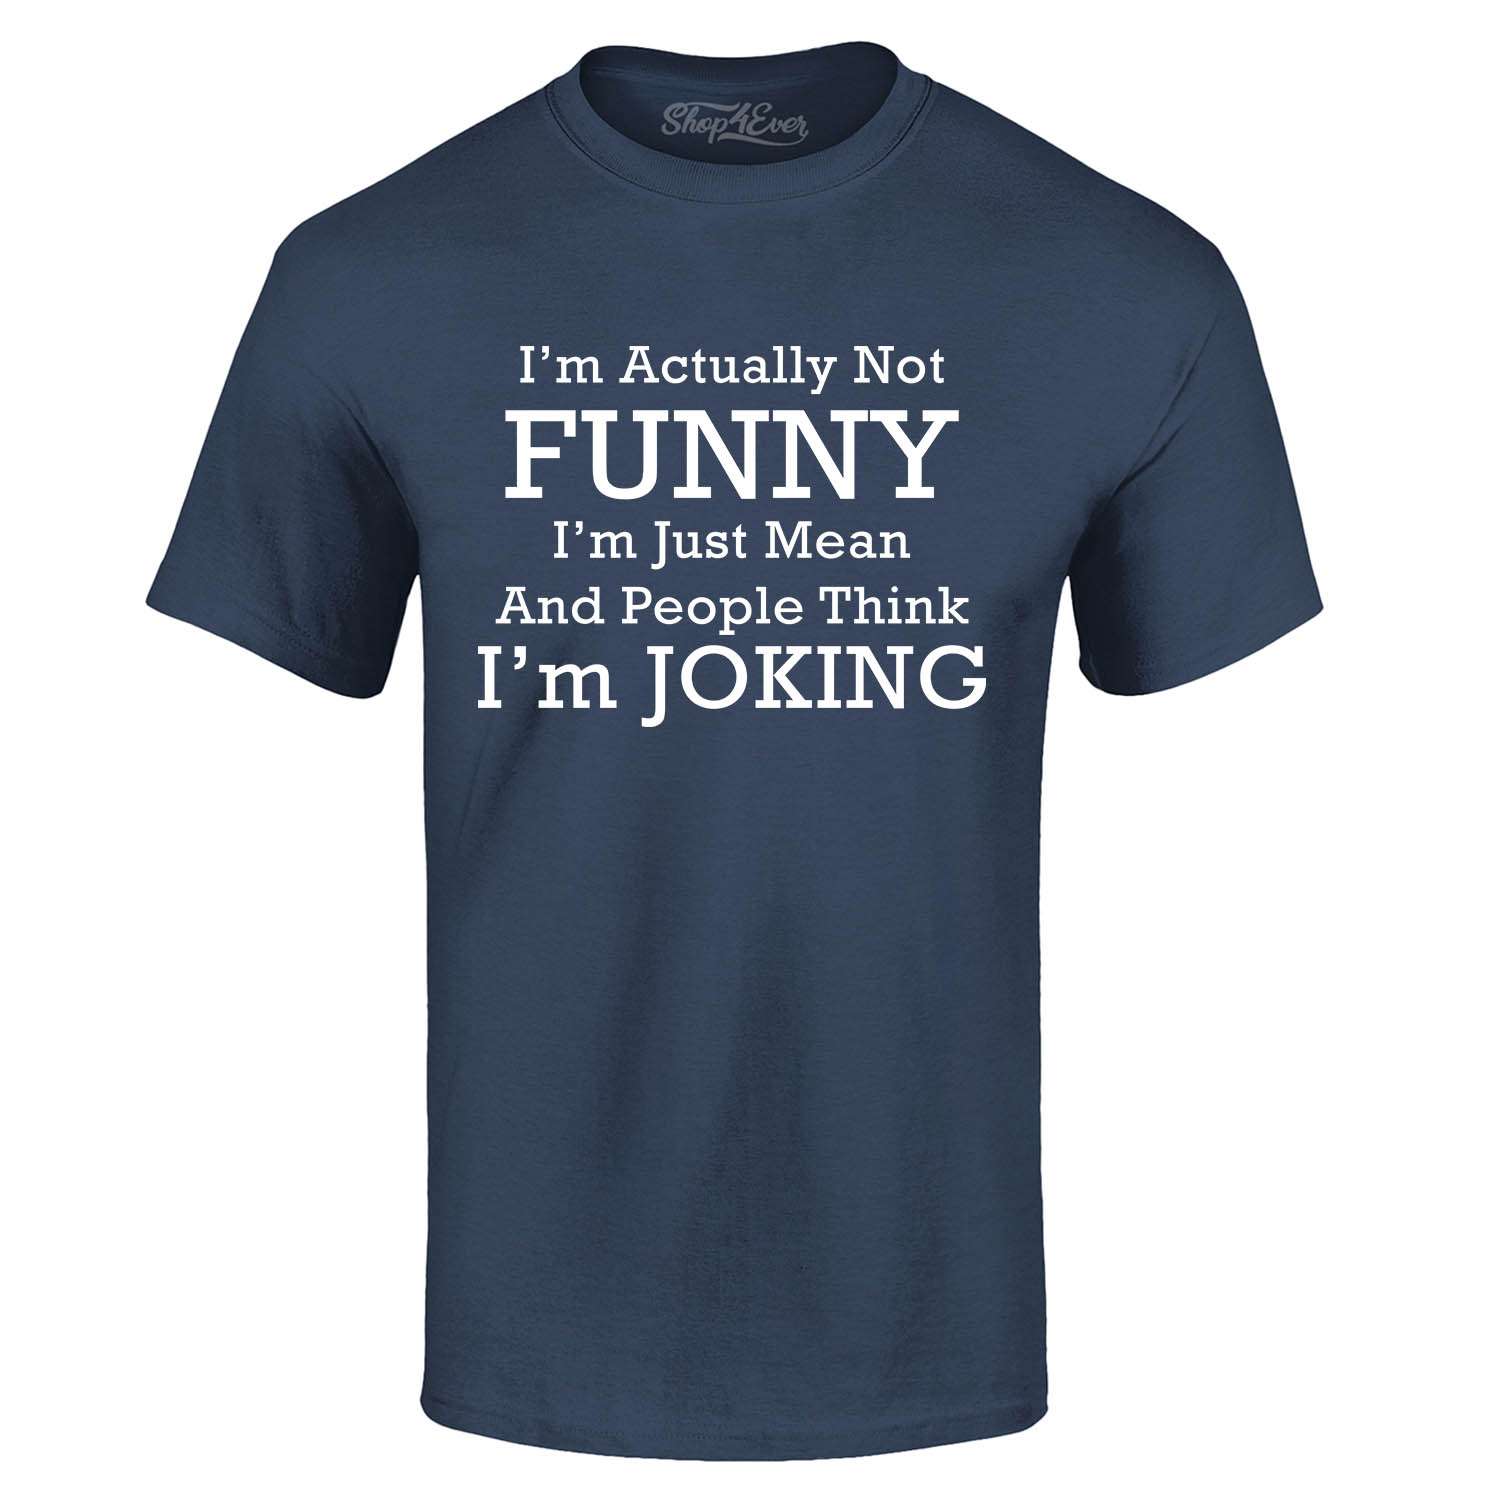 I'm Actually Not Funny I'm Just Mean T-shirt Funny Sarcastic Shirts | eBay